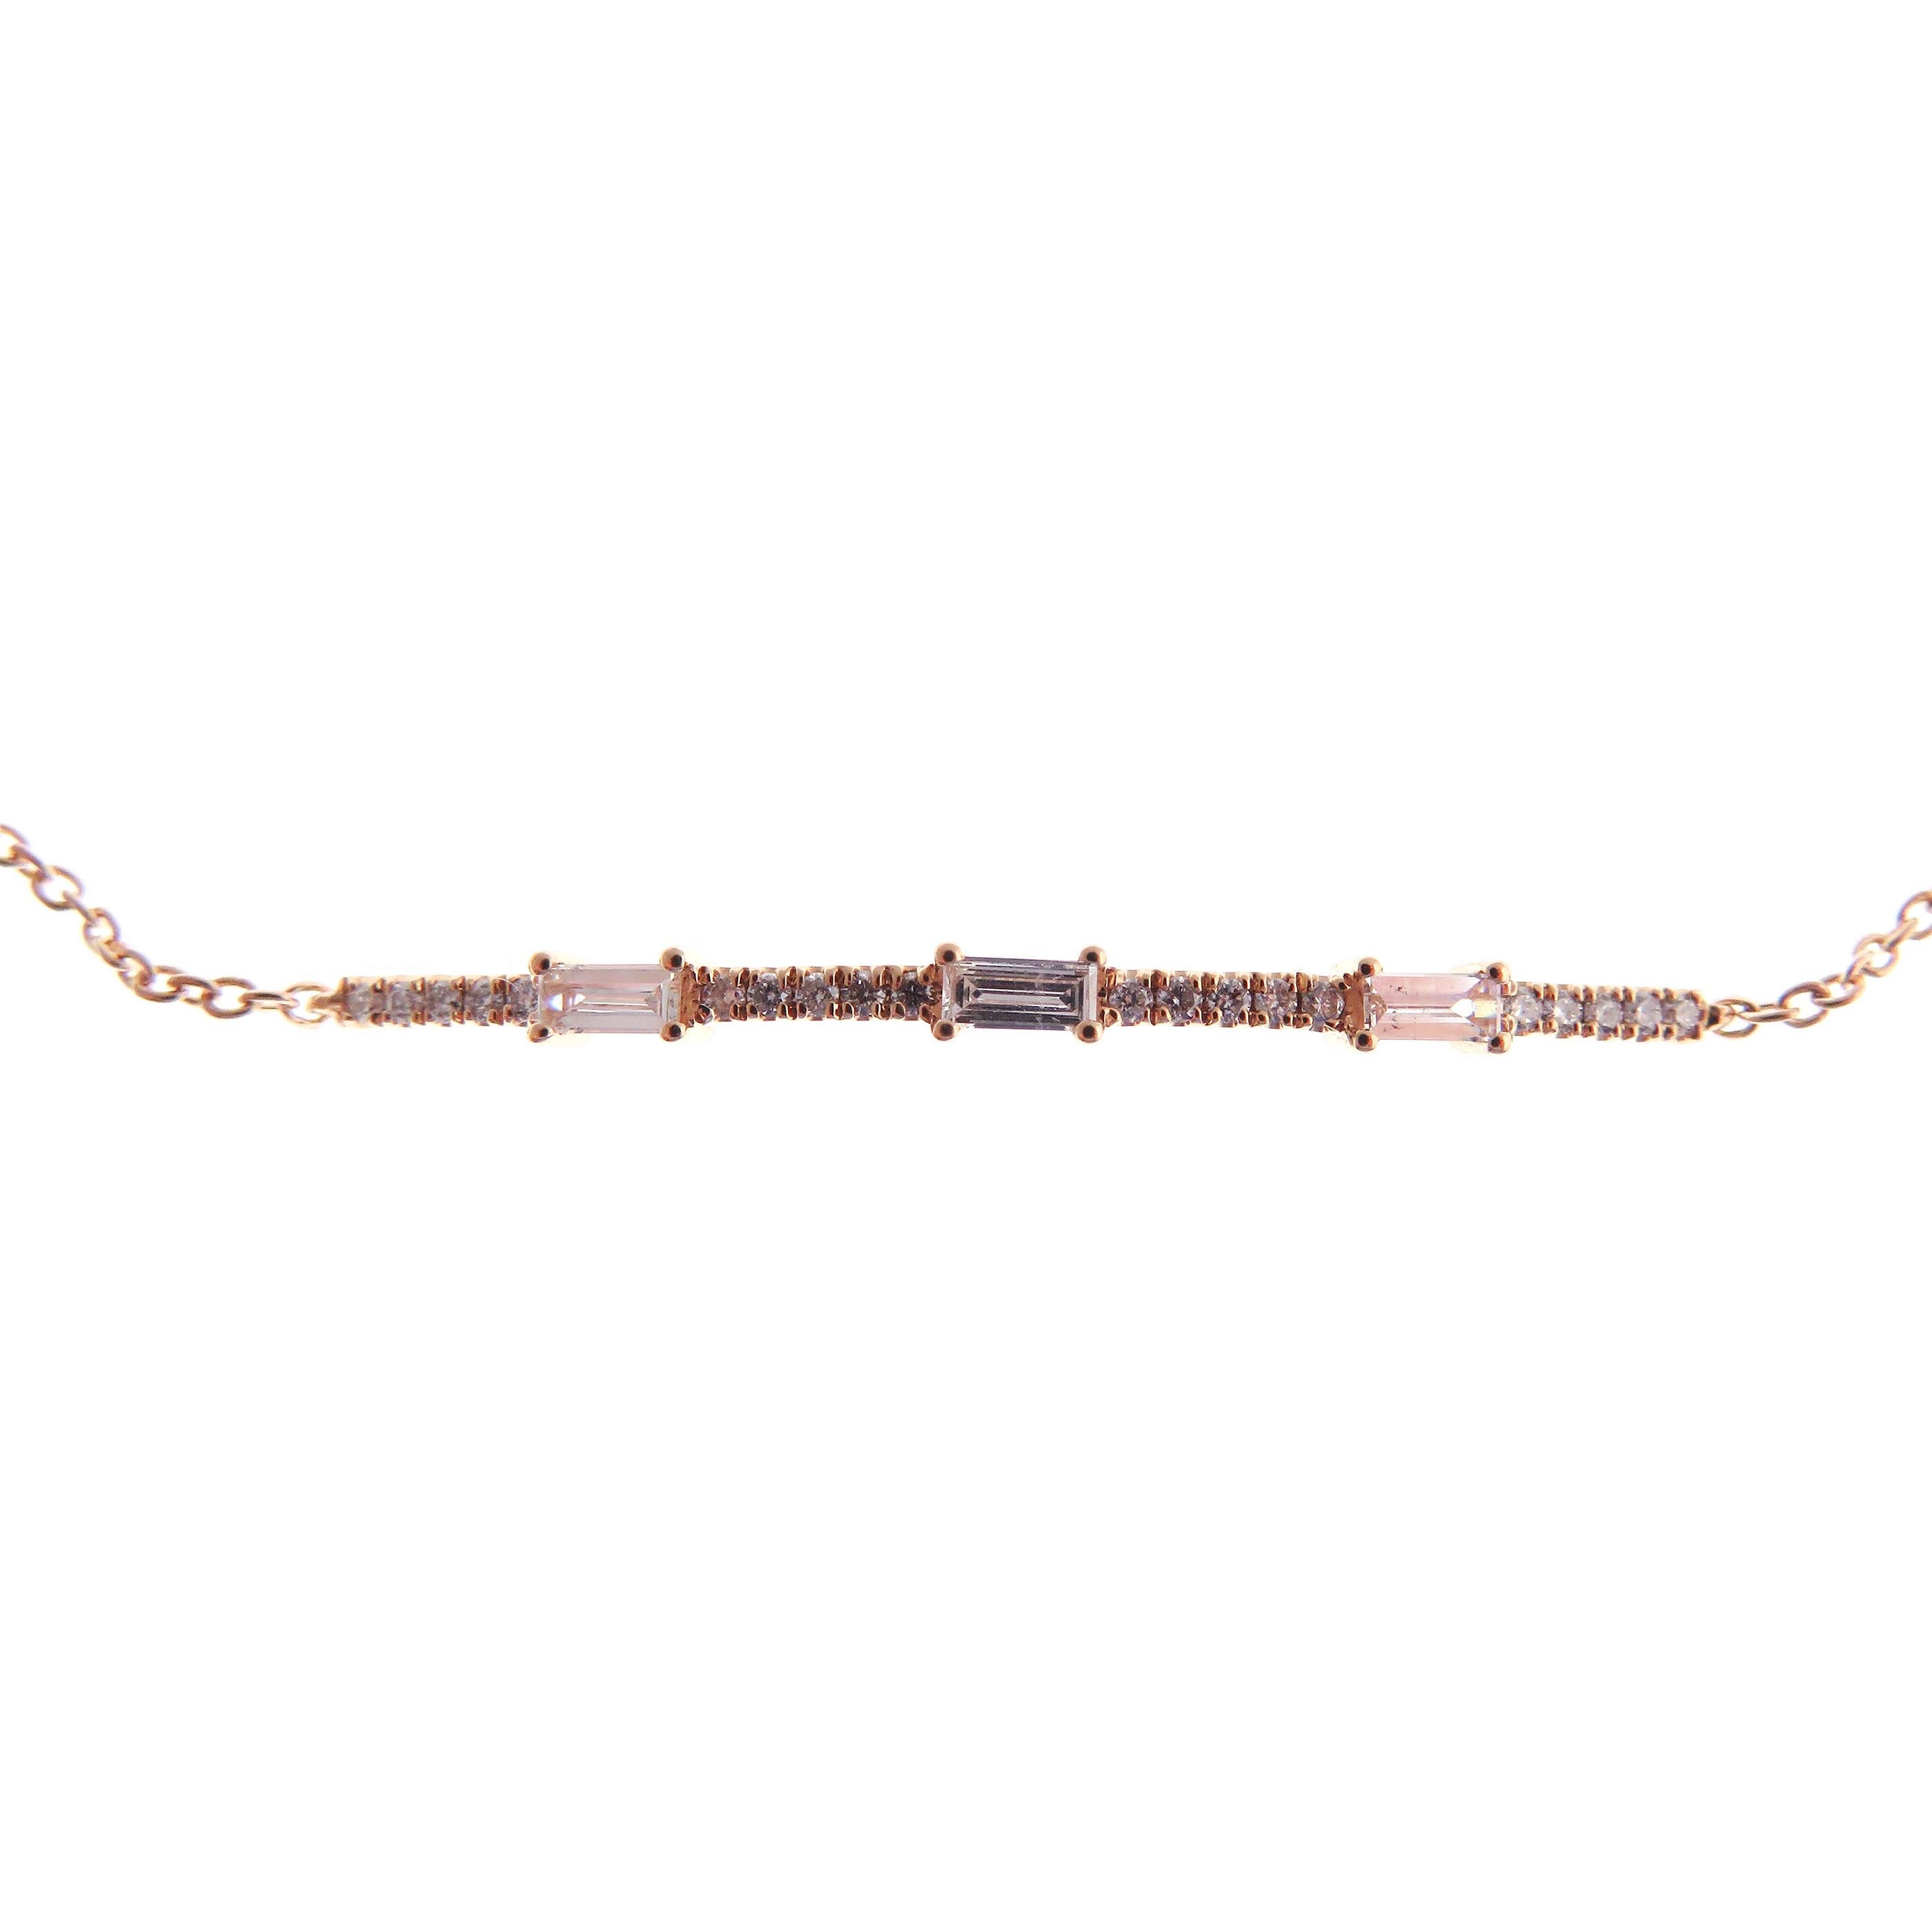 This delicate, diamond bracelet is crafted in 18-karat rose gold, weighing approximately 0.25 total carats of SI Quality white diamonds. 
Bracelet clasp is spring ring with adjustable size.

Bracelet is approximately 7